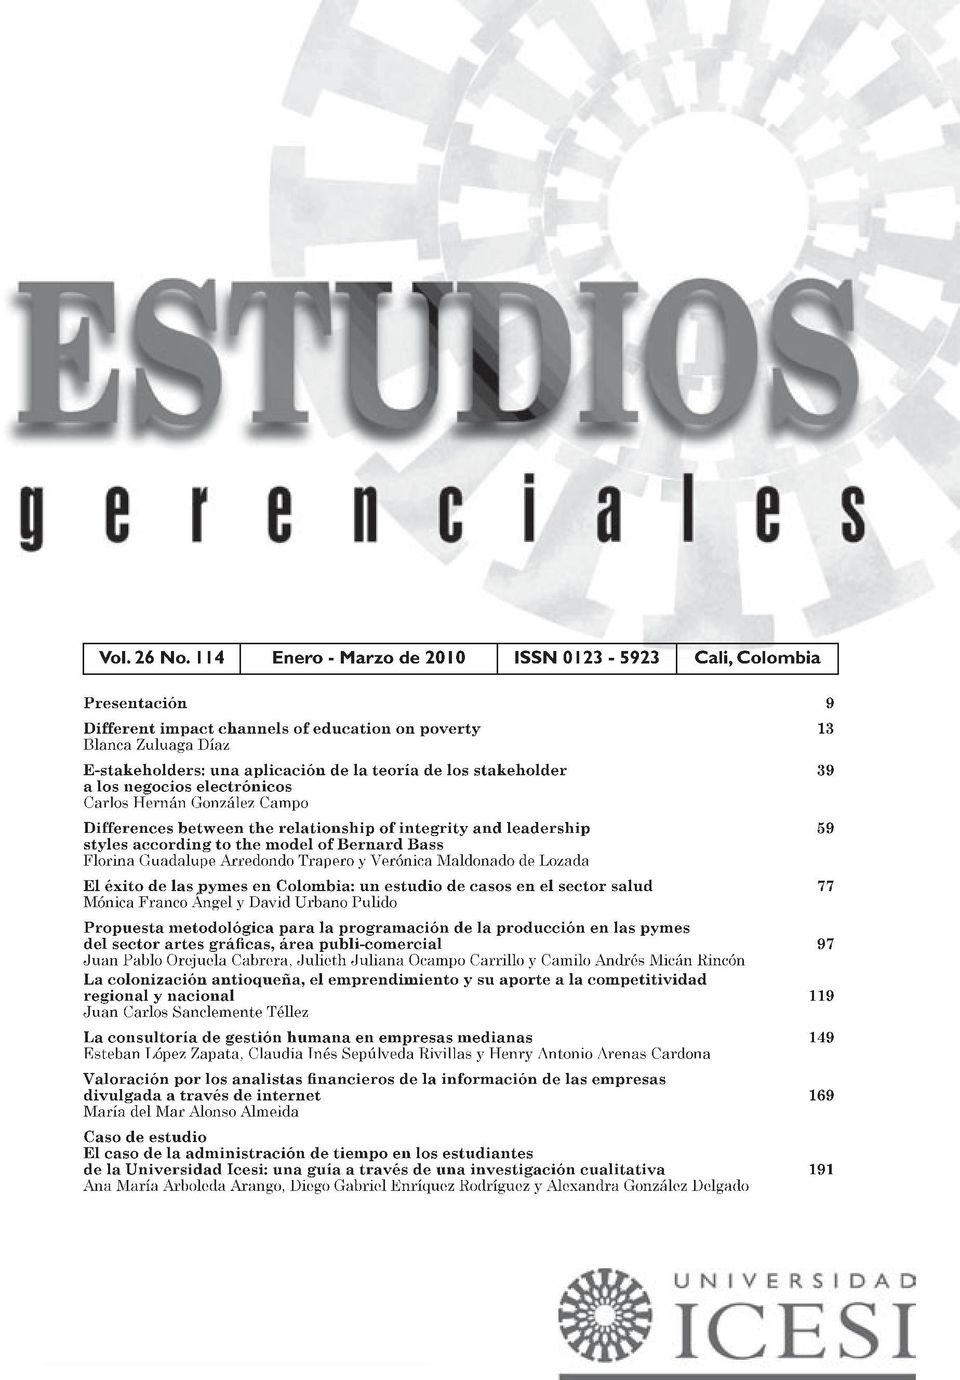 stakeholder 39 a los negocios electrónicos Carlos Hernán González Campo Differences between the relationship of integrity and leadership 59 styles according to the model of Bernard Bass Florina